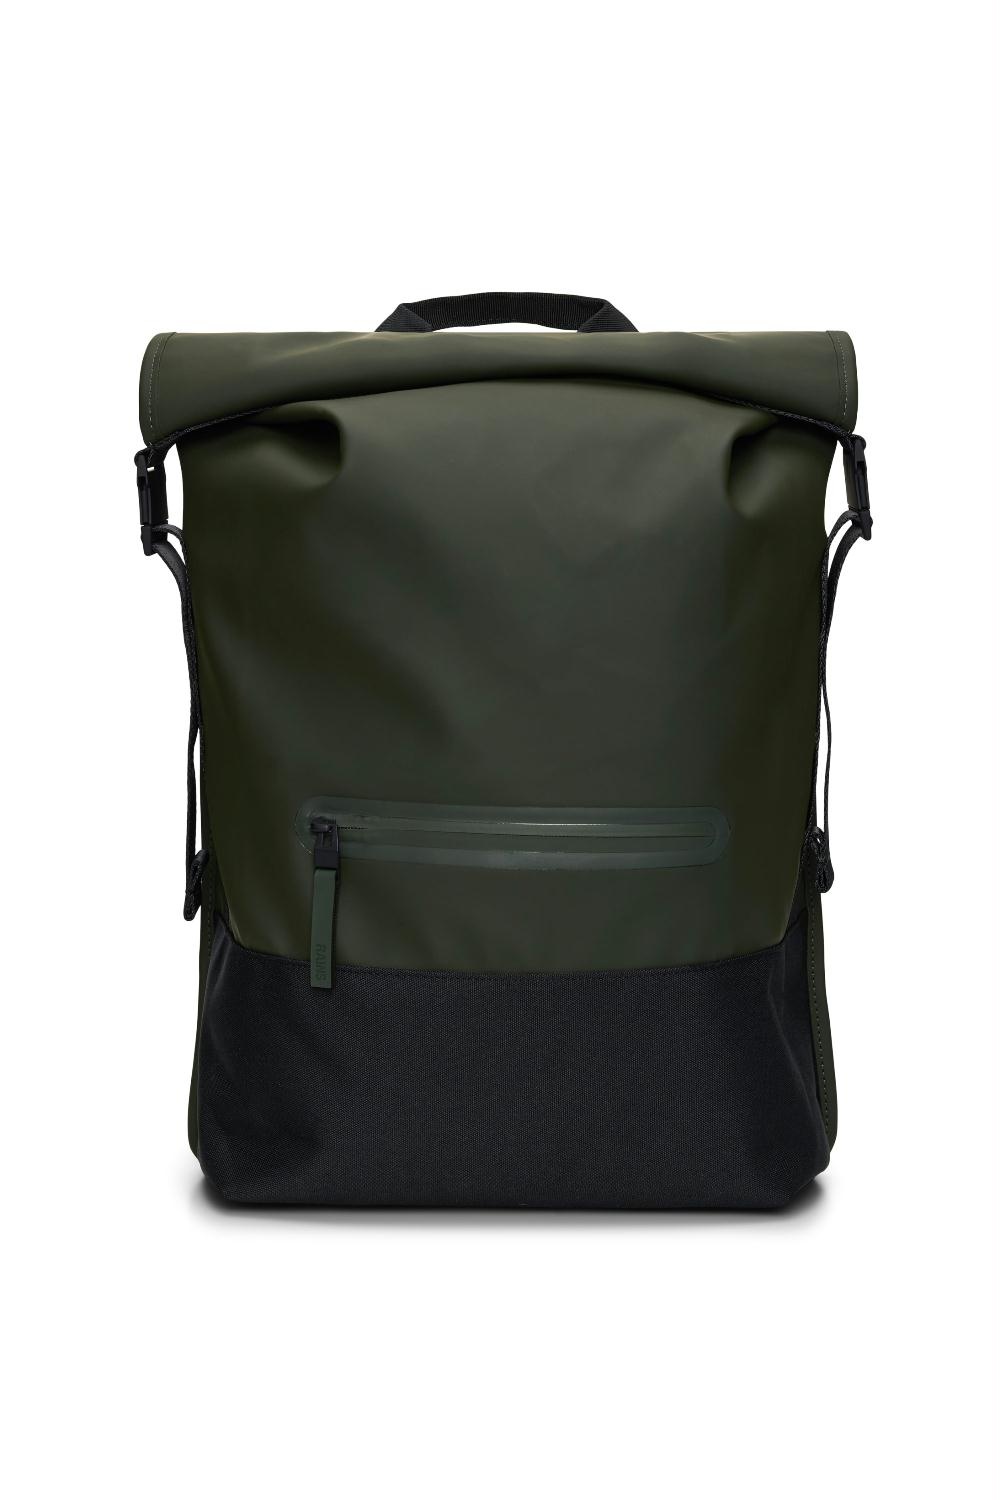 RAINS TRAIL ROLLTOP BACKPACK GREEN